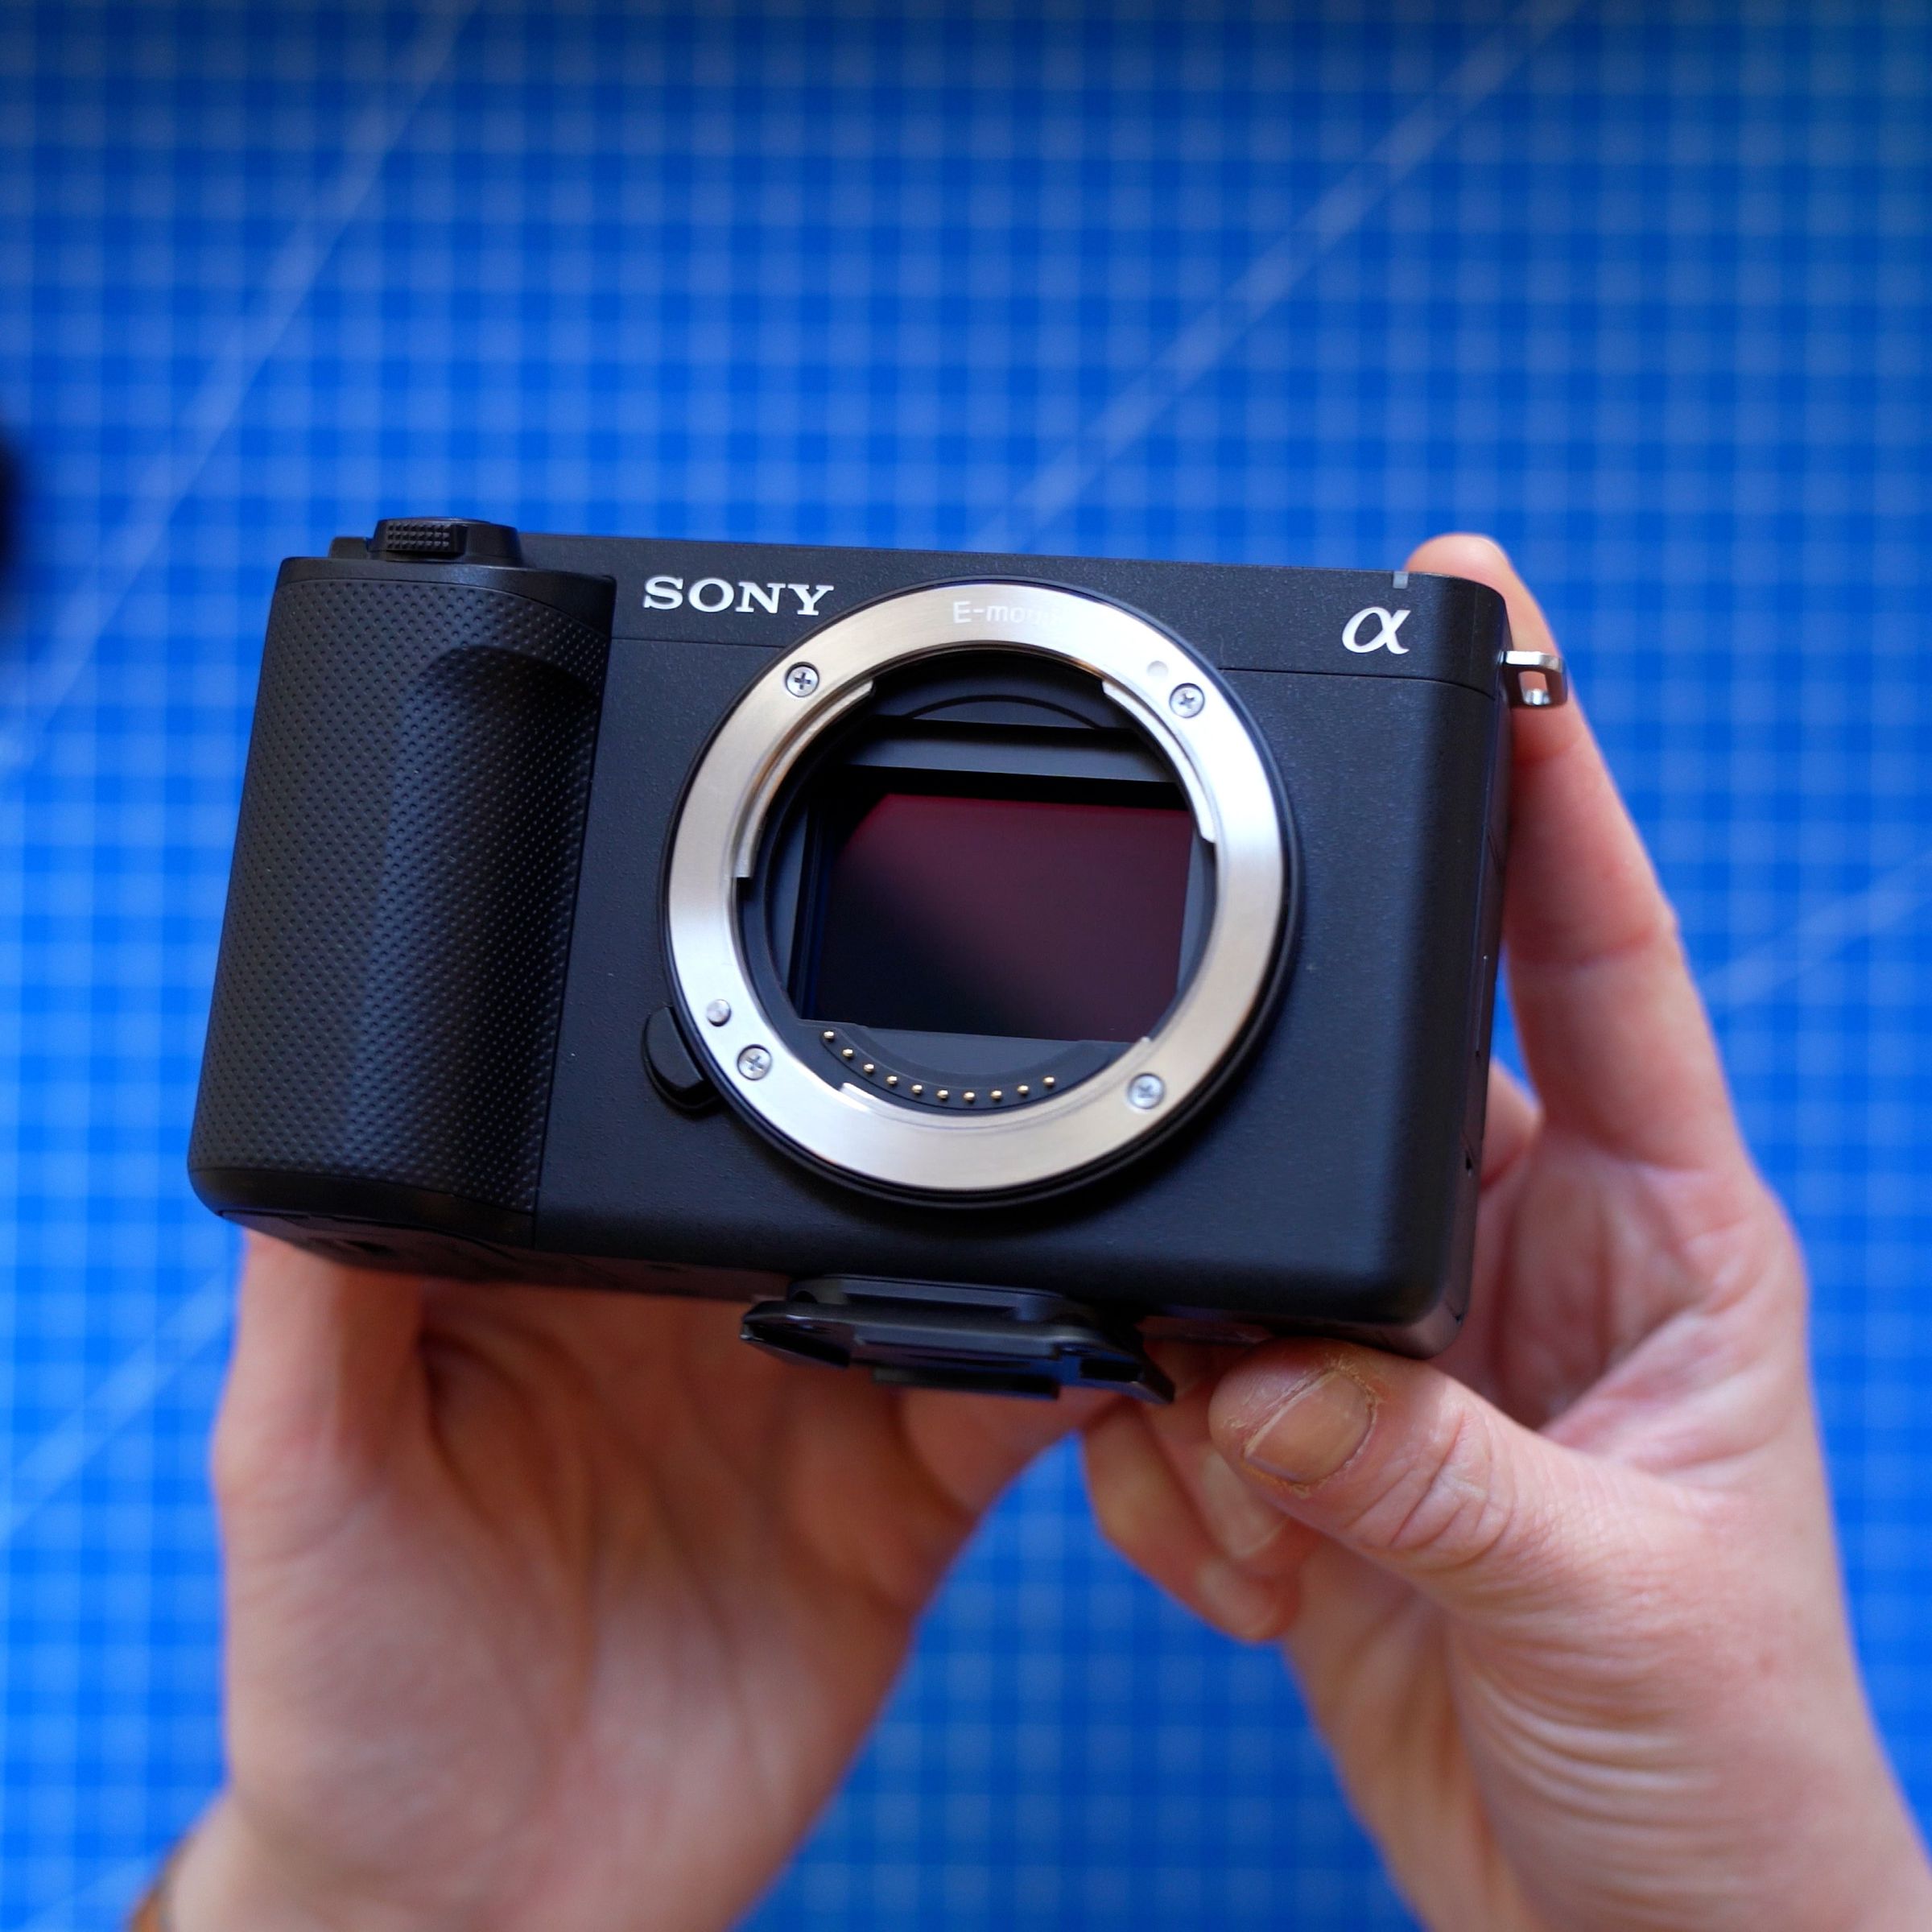 The Sony ZV-E1 camera without a lens attached, held up in a person’s hands above a blue cutting mat.